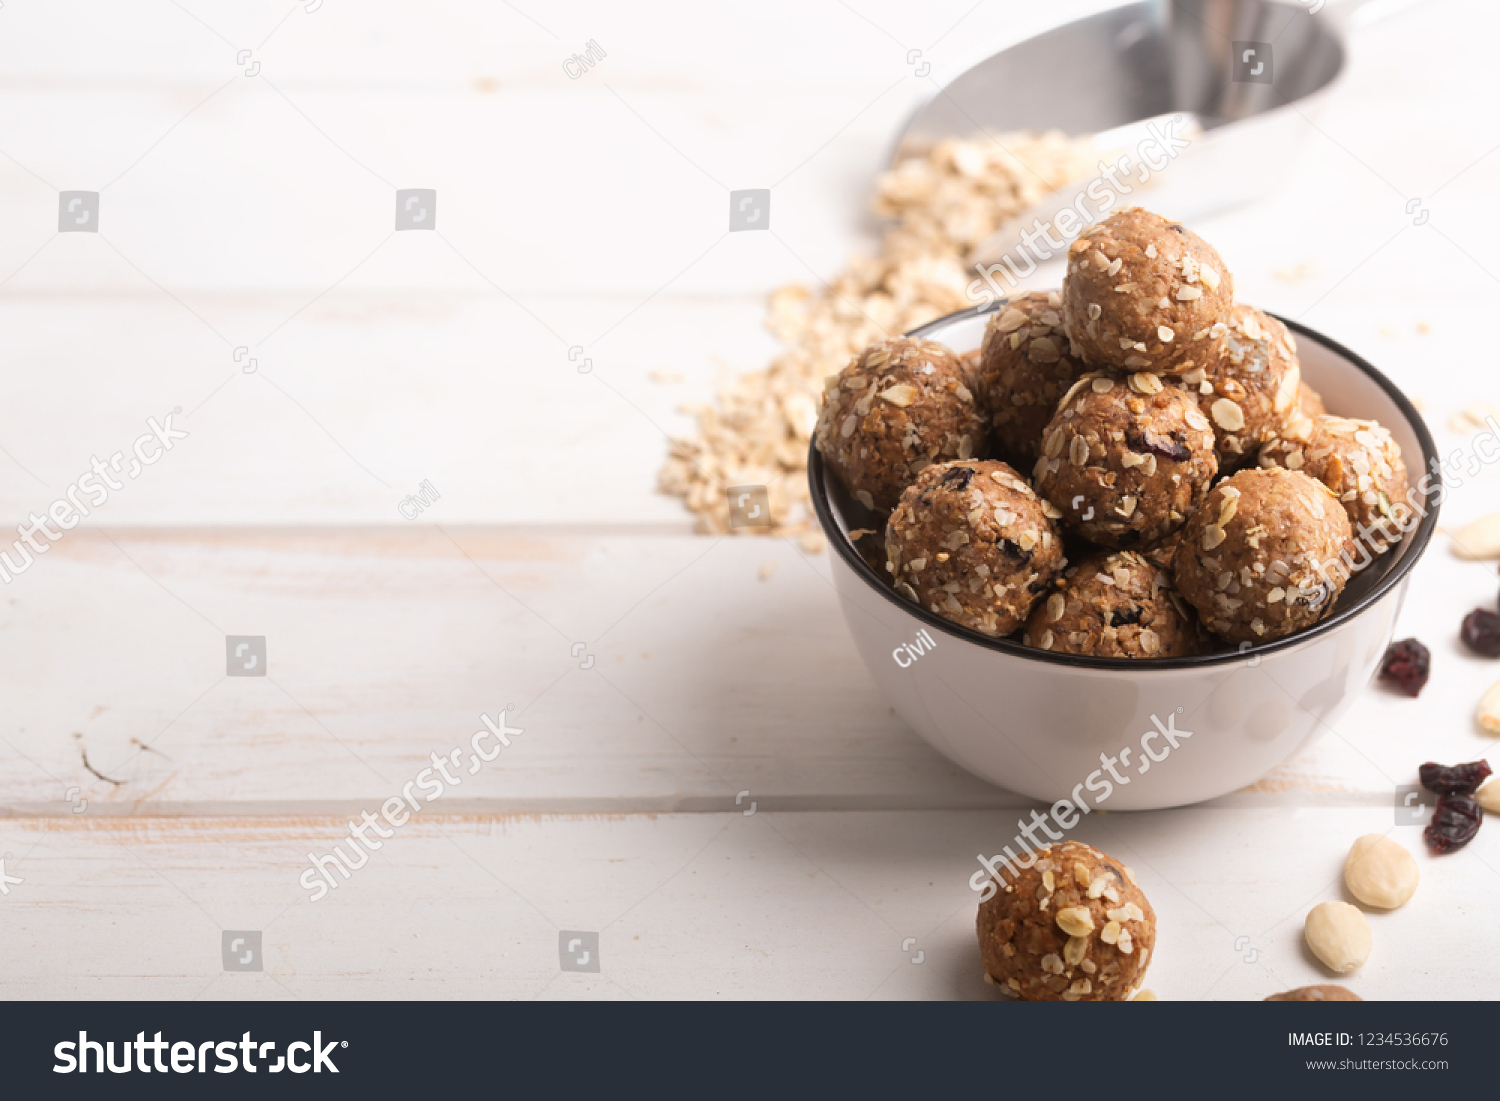 If you have a question how to make the no bake energy bites - just mix all ingredients, such as nuts, cocoa, chocolate, oats together in a large bowl until combined. Wooden background #1234536676